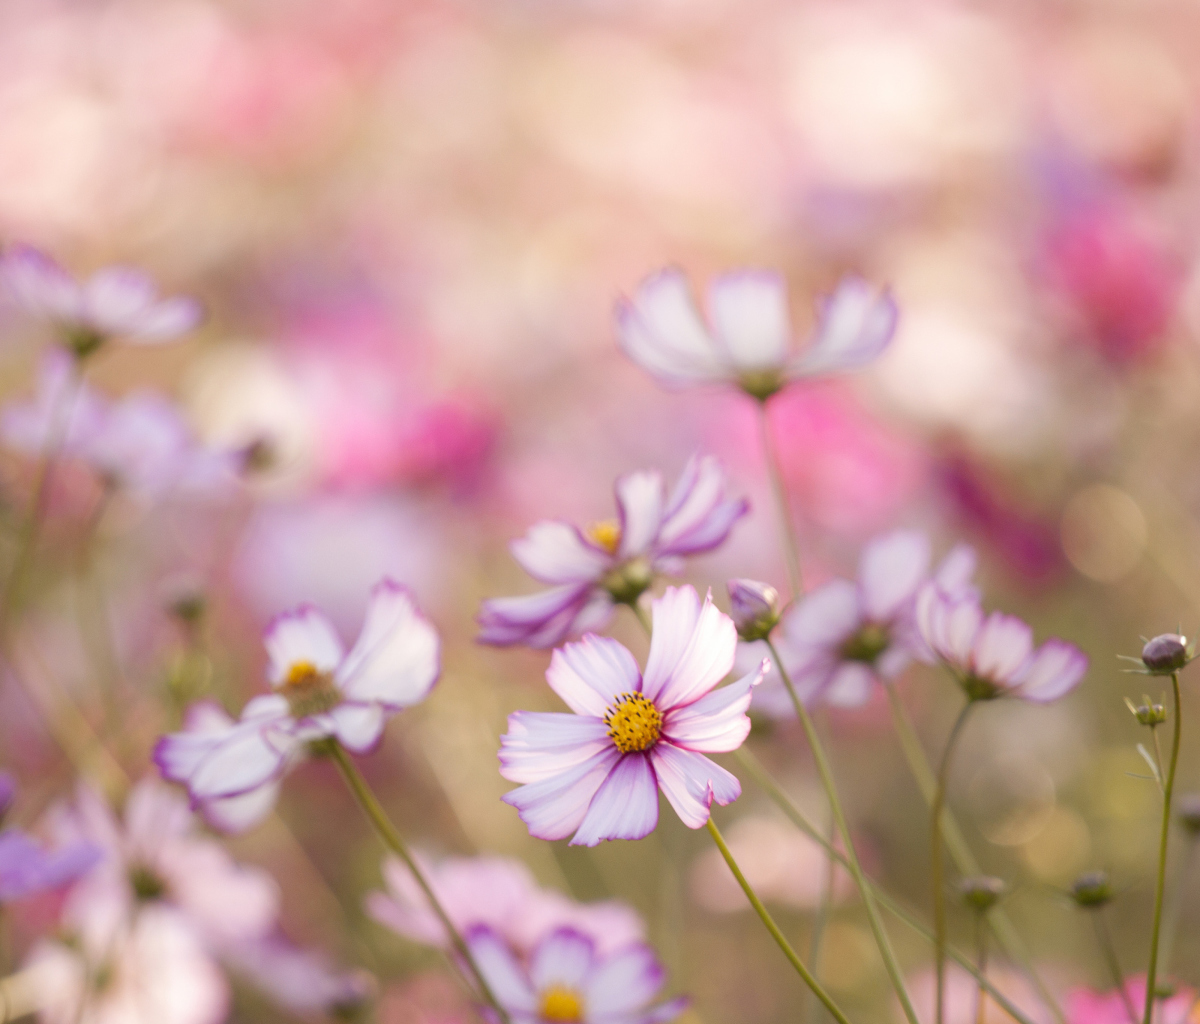 Das Field Of White And Pink Petals Wallpaper 1200x1024